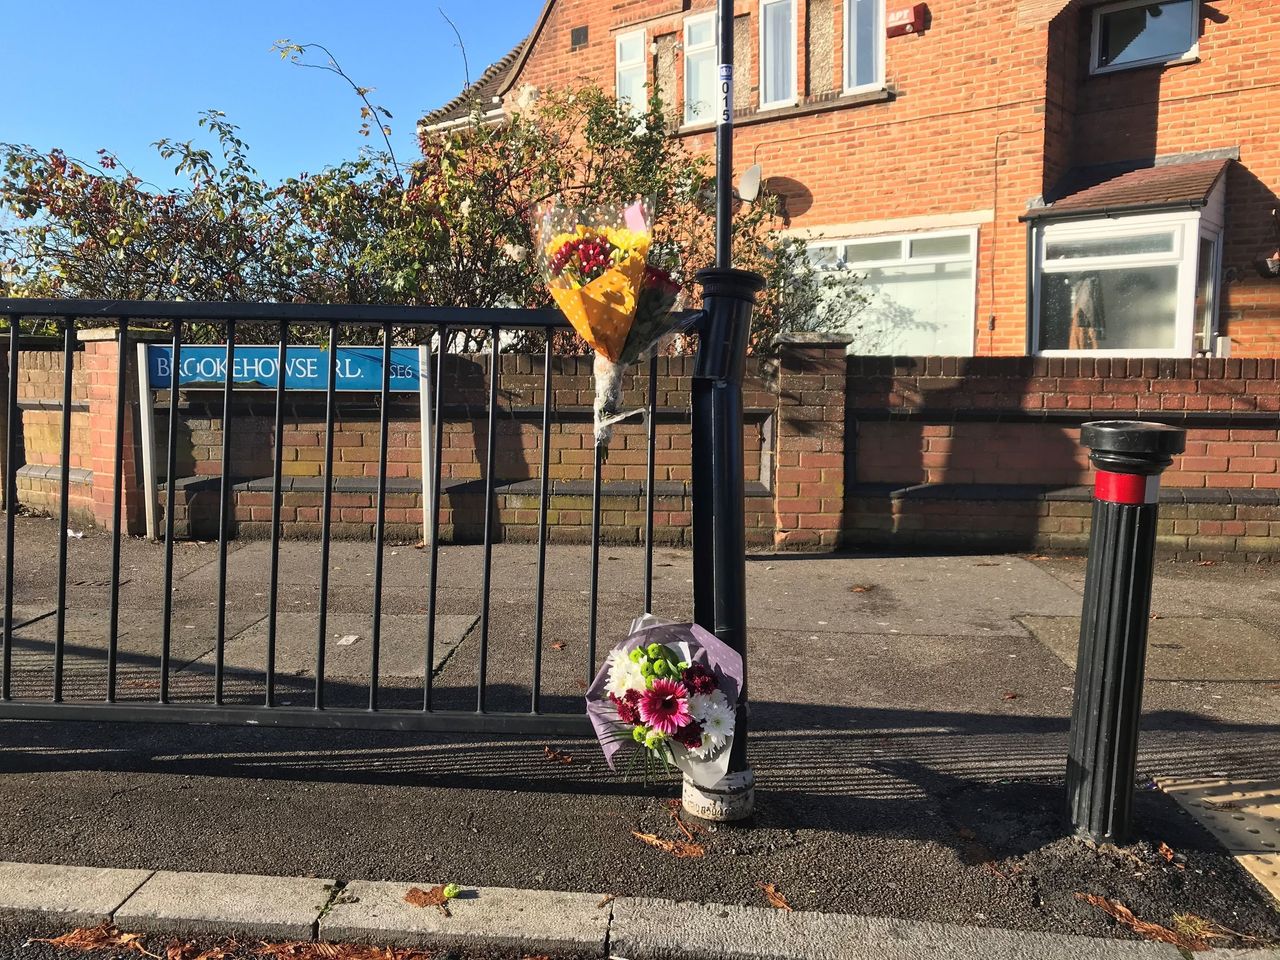 Flowers left at scene in Randlesdown Road in Bellingham, south-east London, where a 15-year-old boy was fatally stabbed.